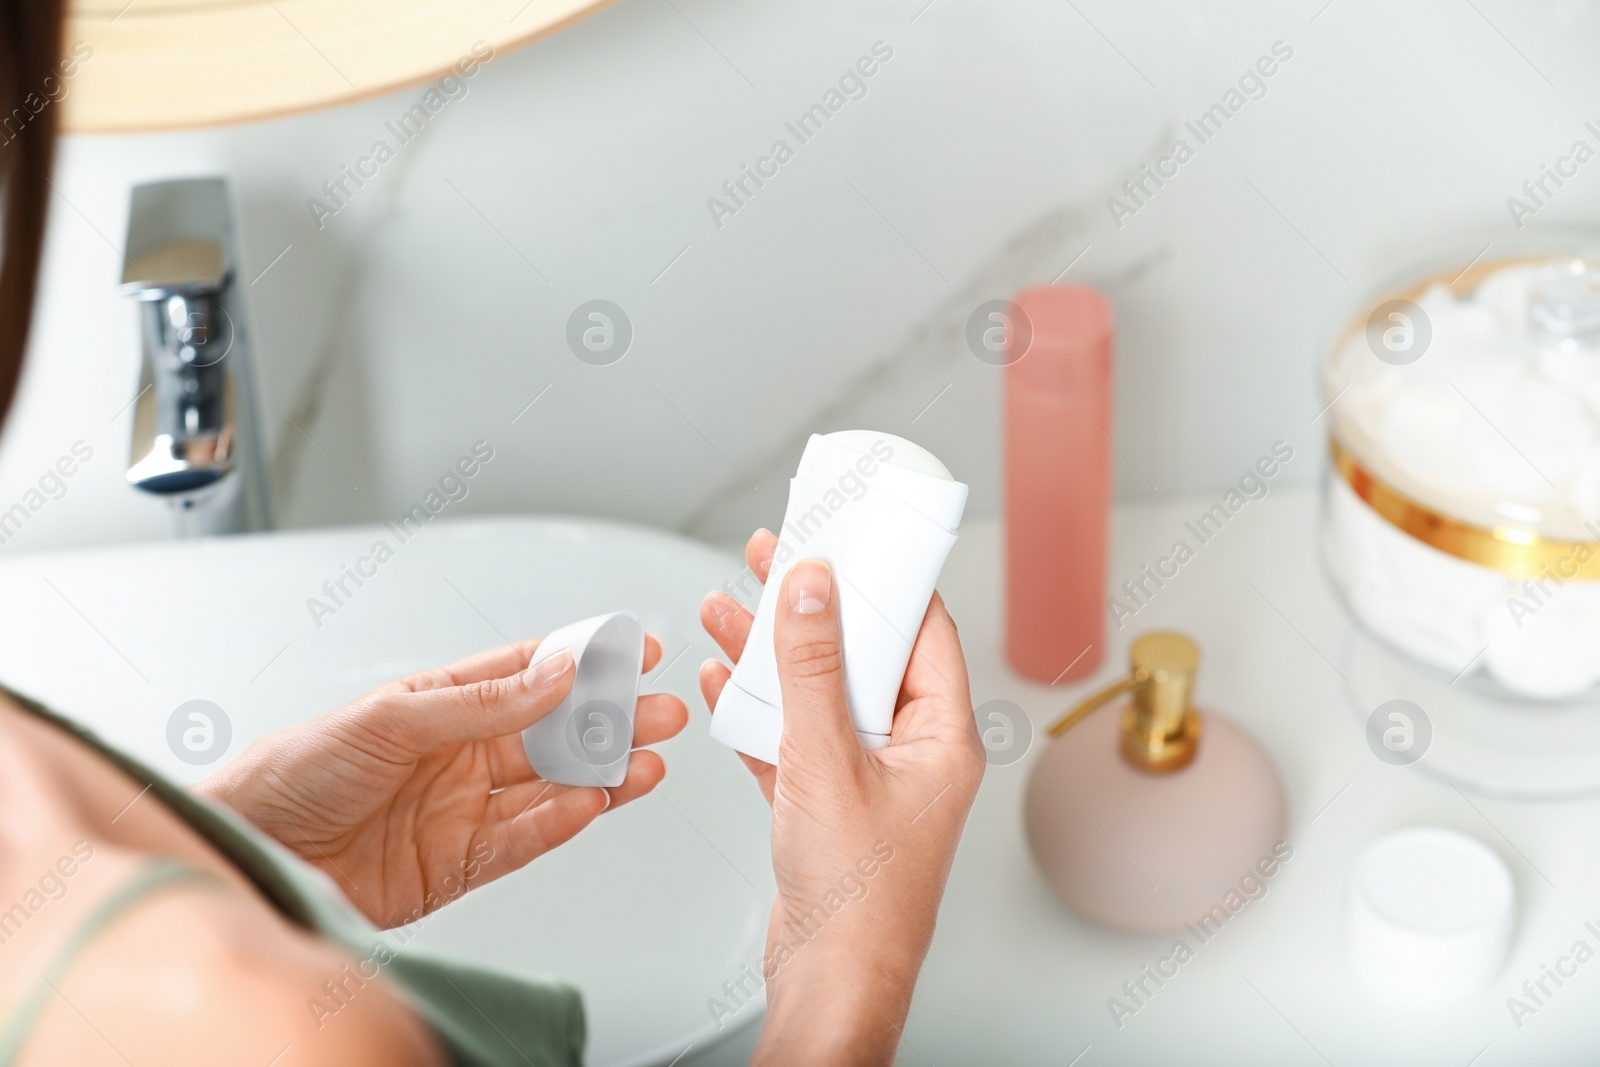 Photo of Woman holding stick deodorant in bathroom, closeup view